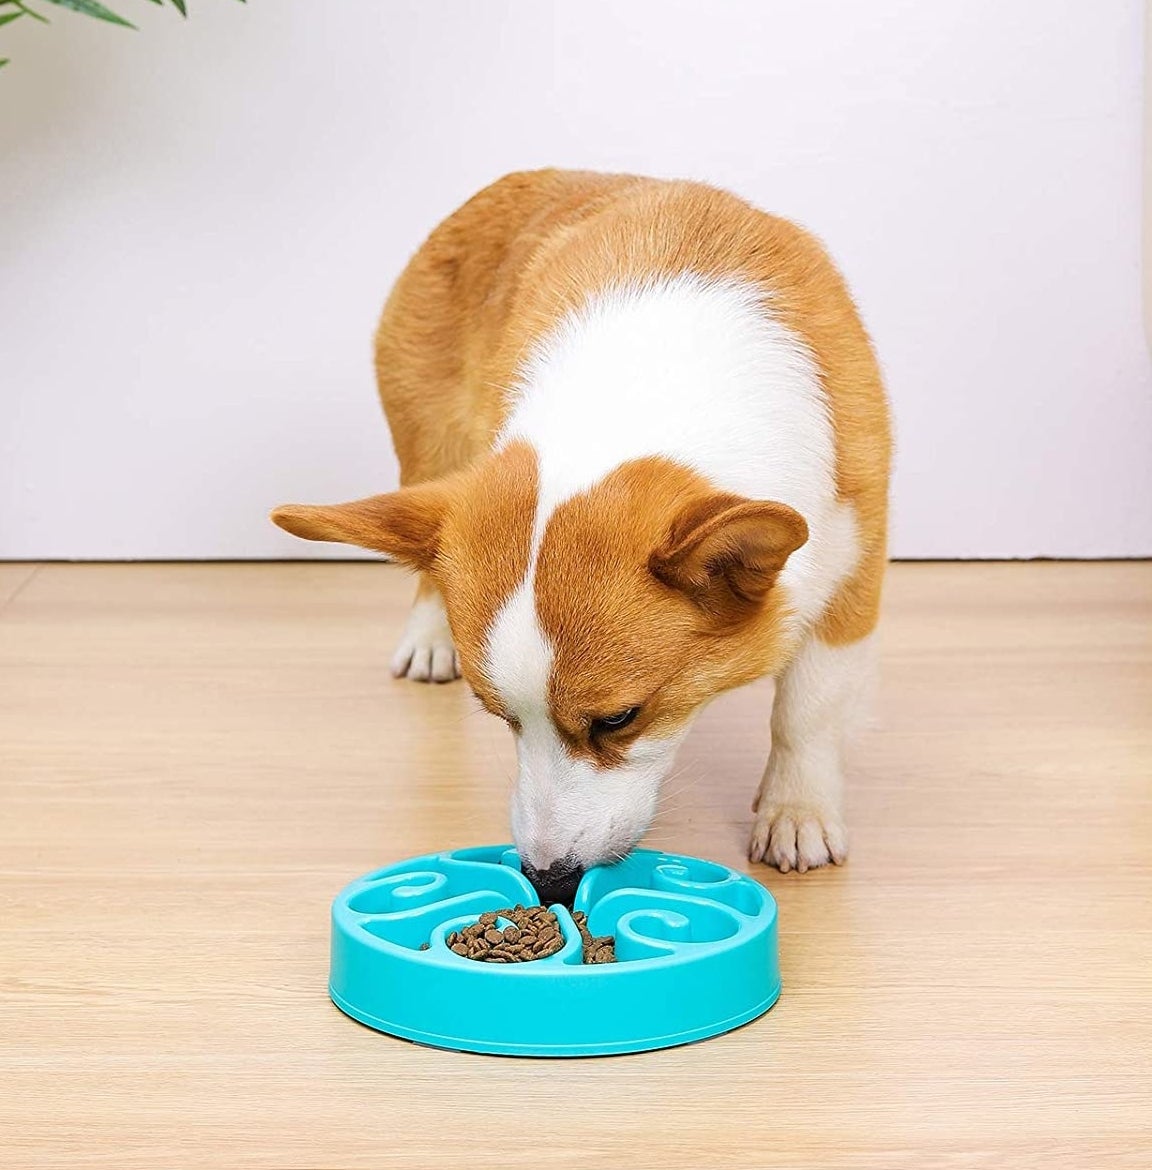 The dog eating out of the bowl